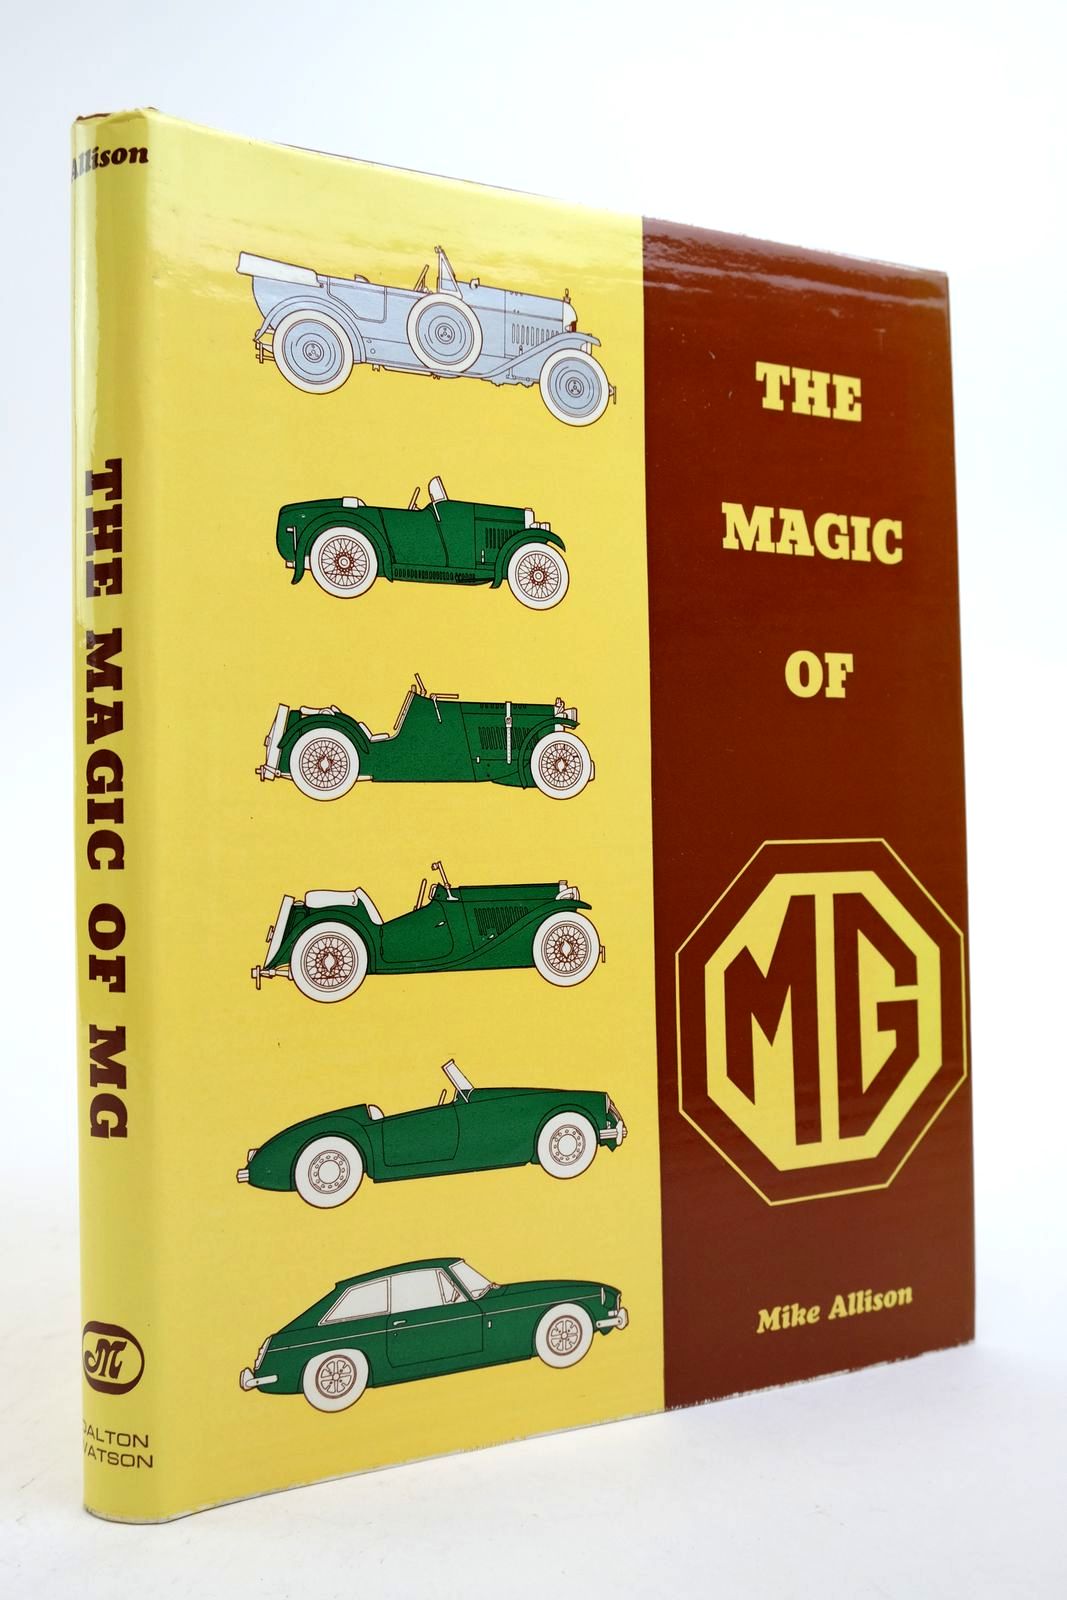 Photo of THE MAGIC OF MG written by Allison, Mike published by Dalton Watson (STOCK CODE: 2139299)  for sale by Stella & Rose's Books